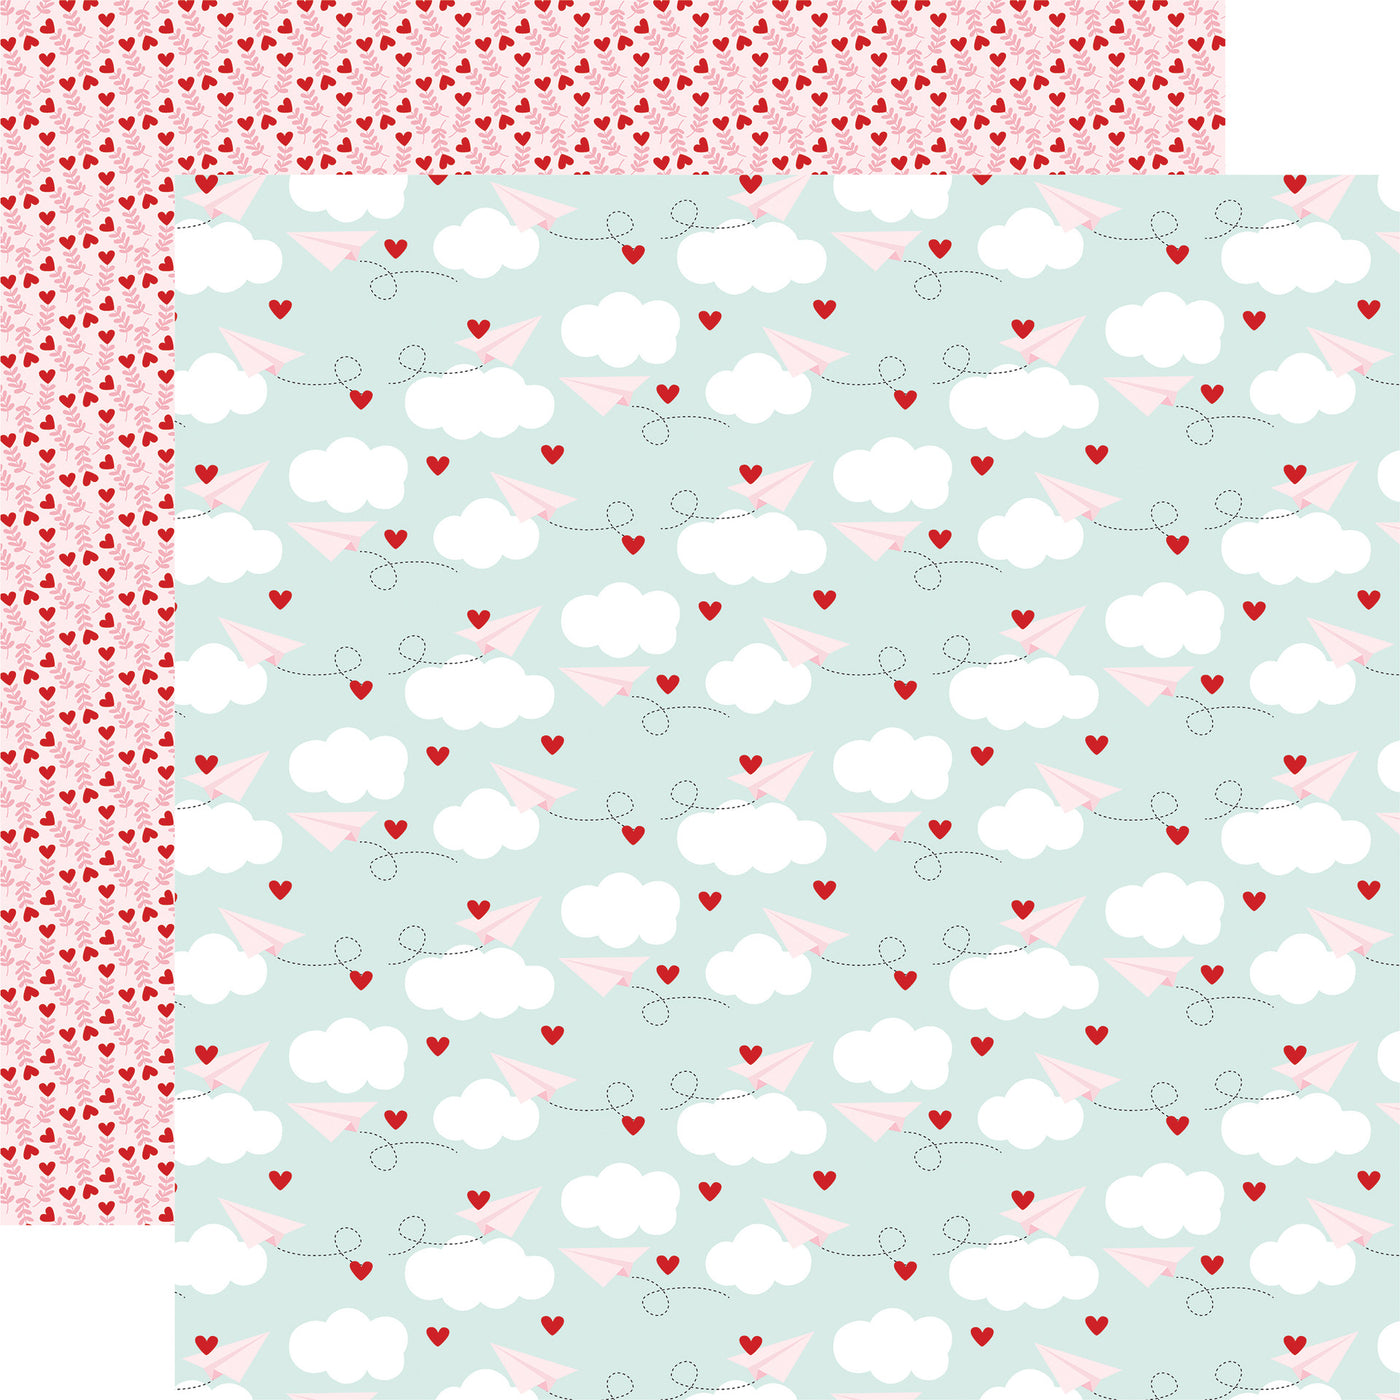 12x12 double-sided sheet. (Side A - sweet, pink, paper airplanes soaring through the sky on a teal background with little red hearts and white clouds; Side B - red hearts pattern on a light pink background) Archival quality, acid-free. 